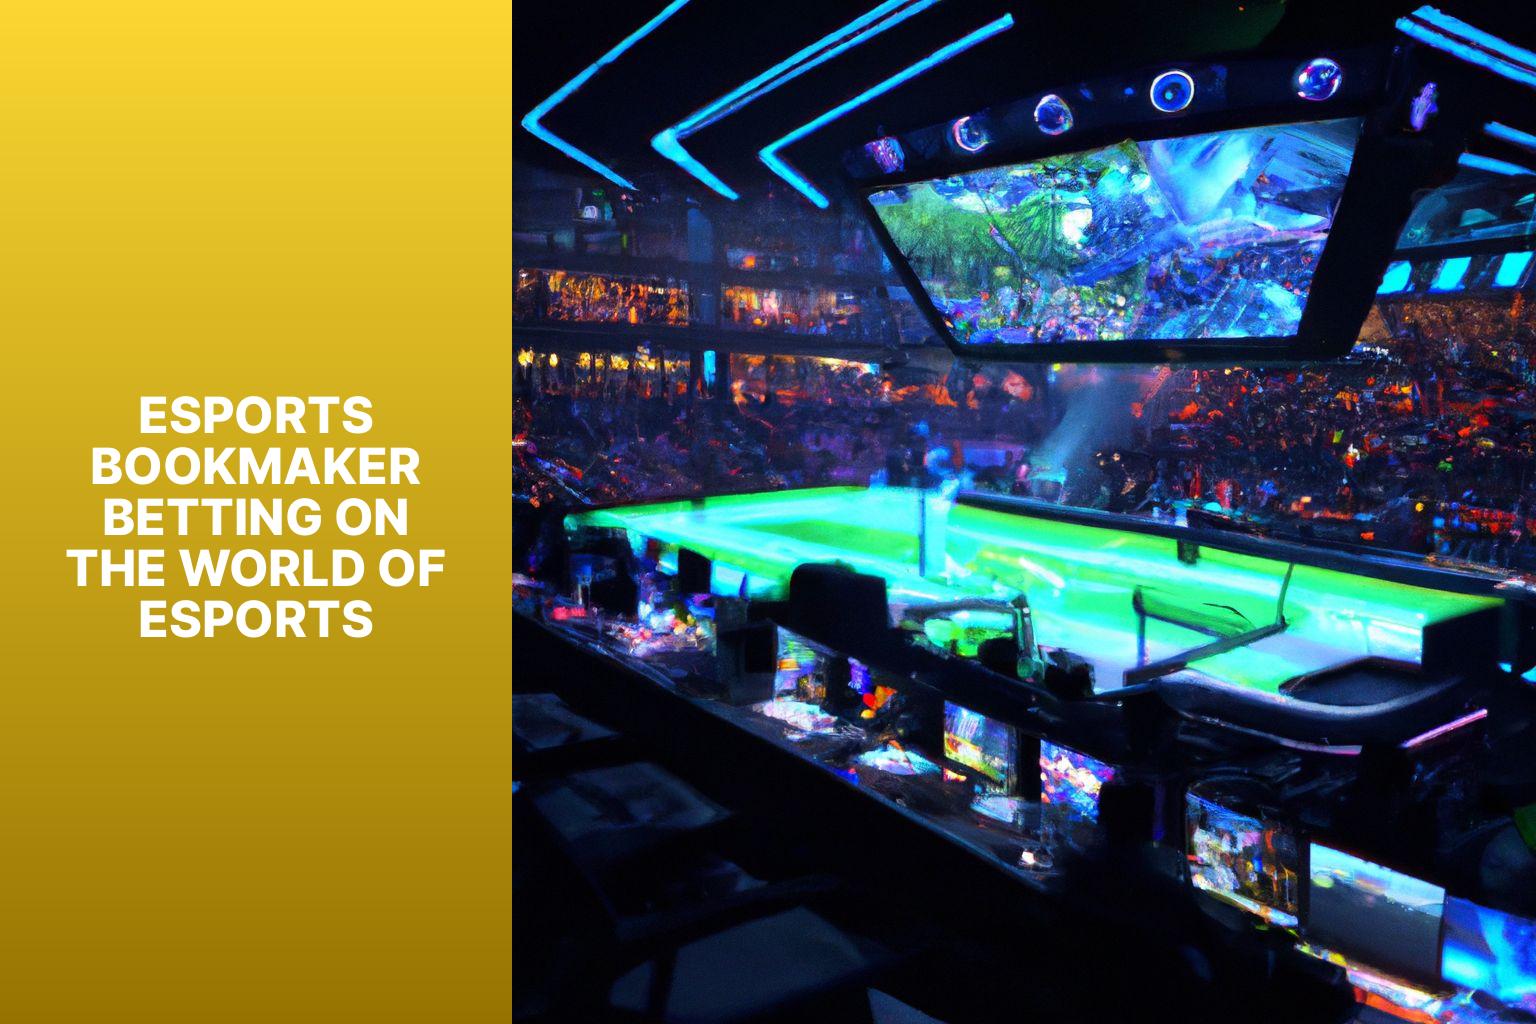 Esports Bookmaker Betting on the World of Esports